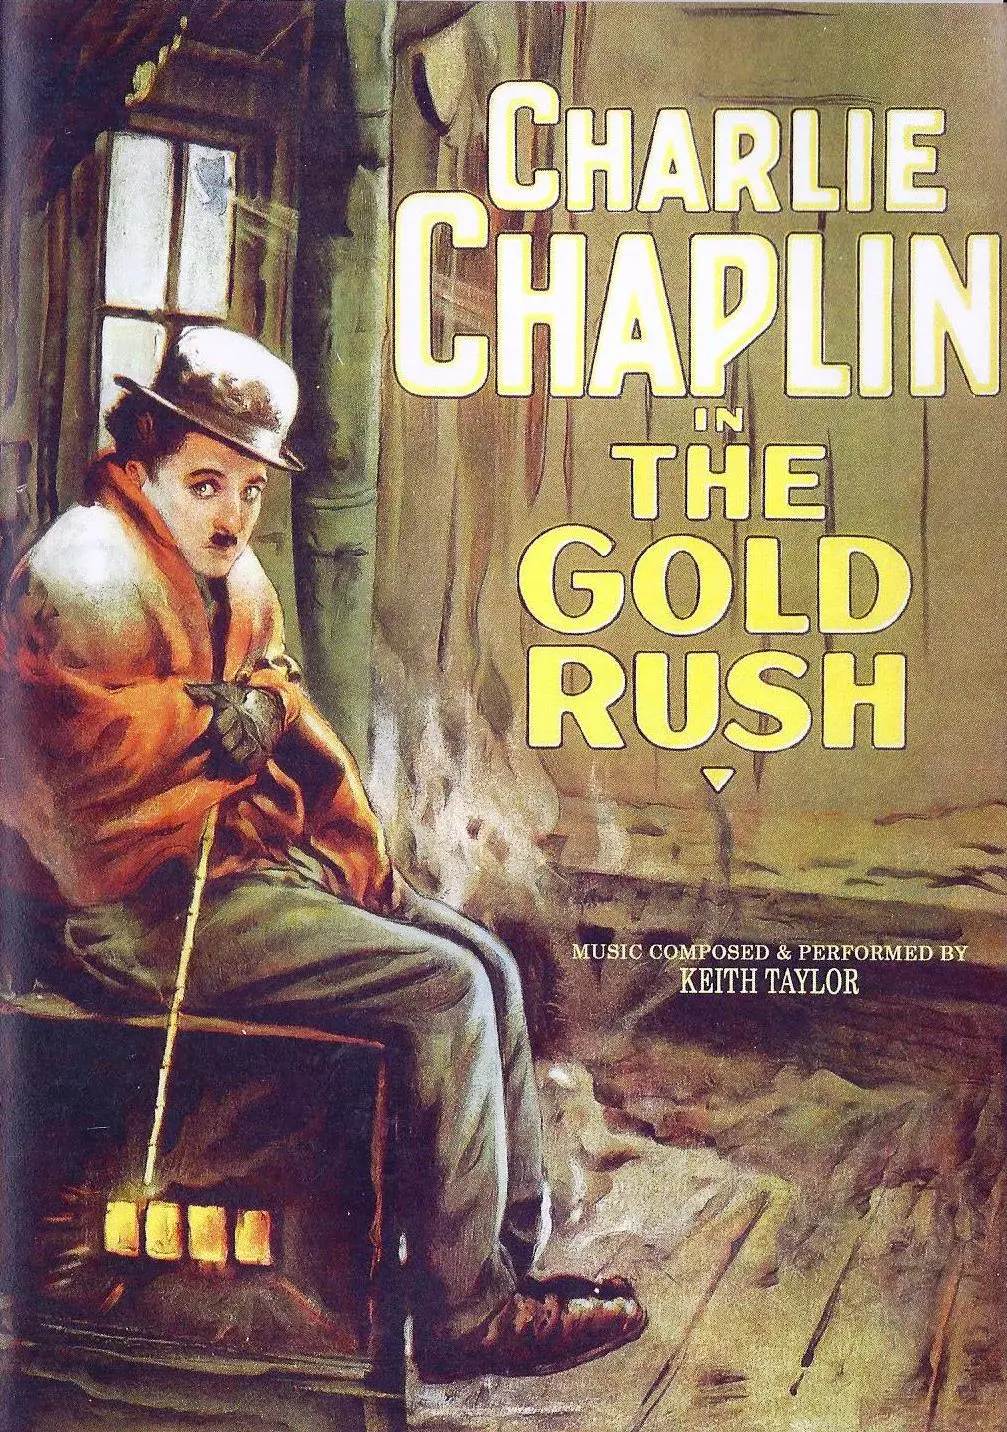 The Gold Rush Silent Movie